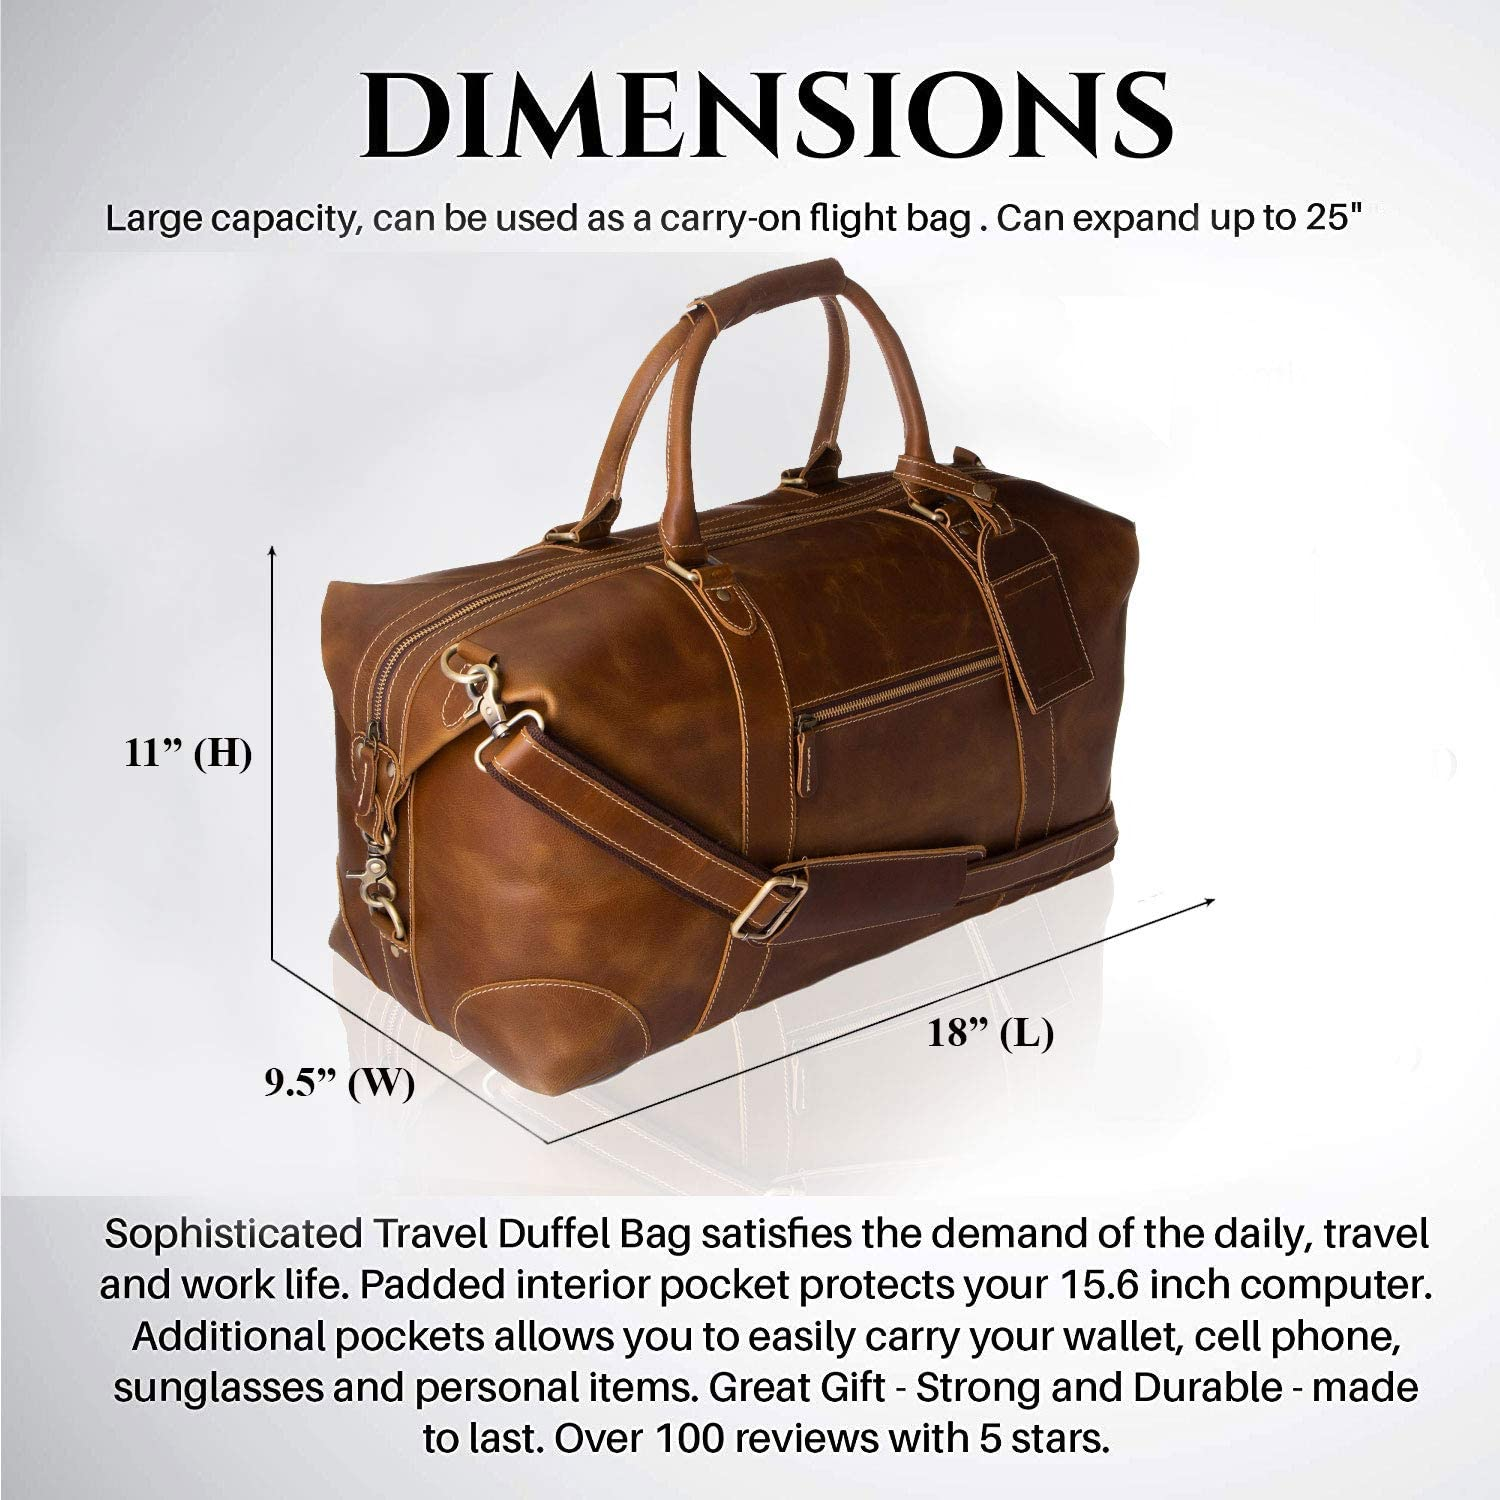 Men Travel Bags Vintage Travel Totes For Women Large Capacity